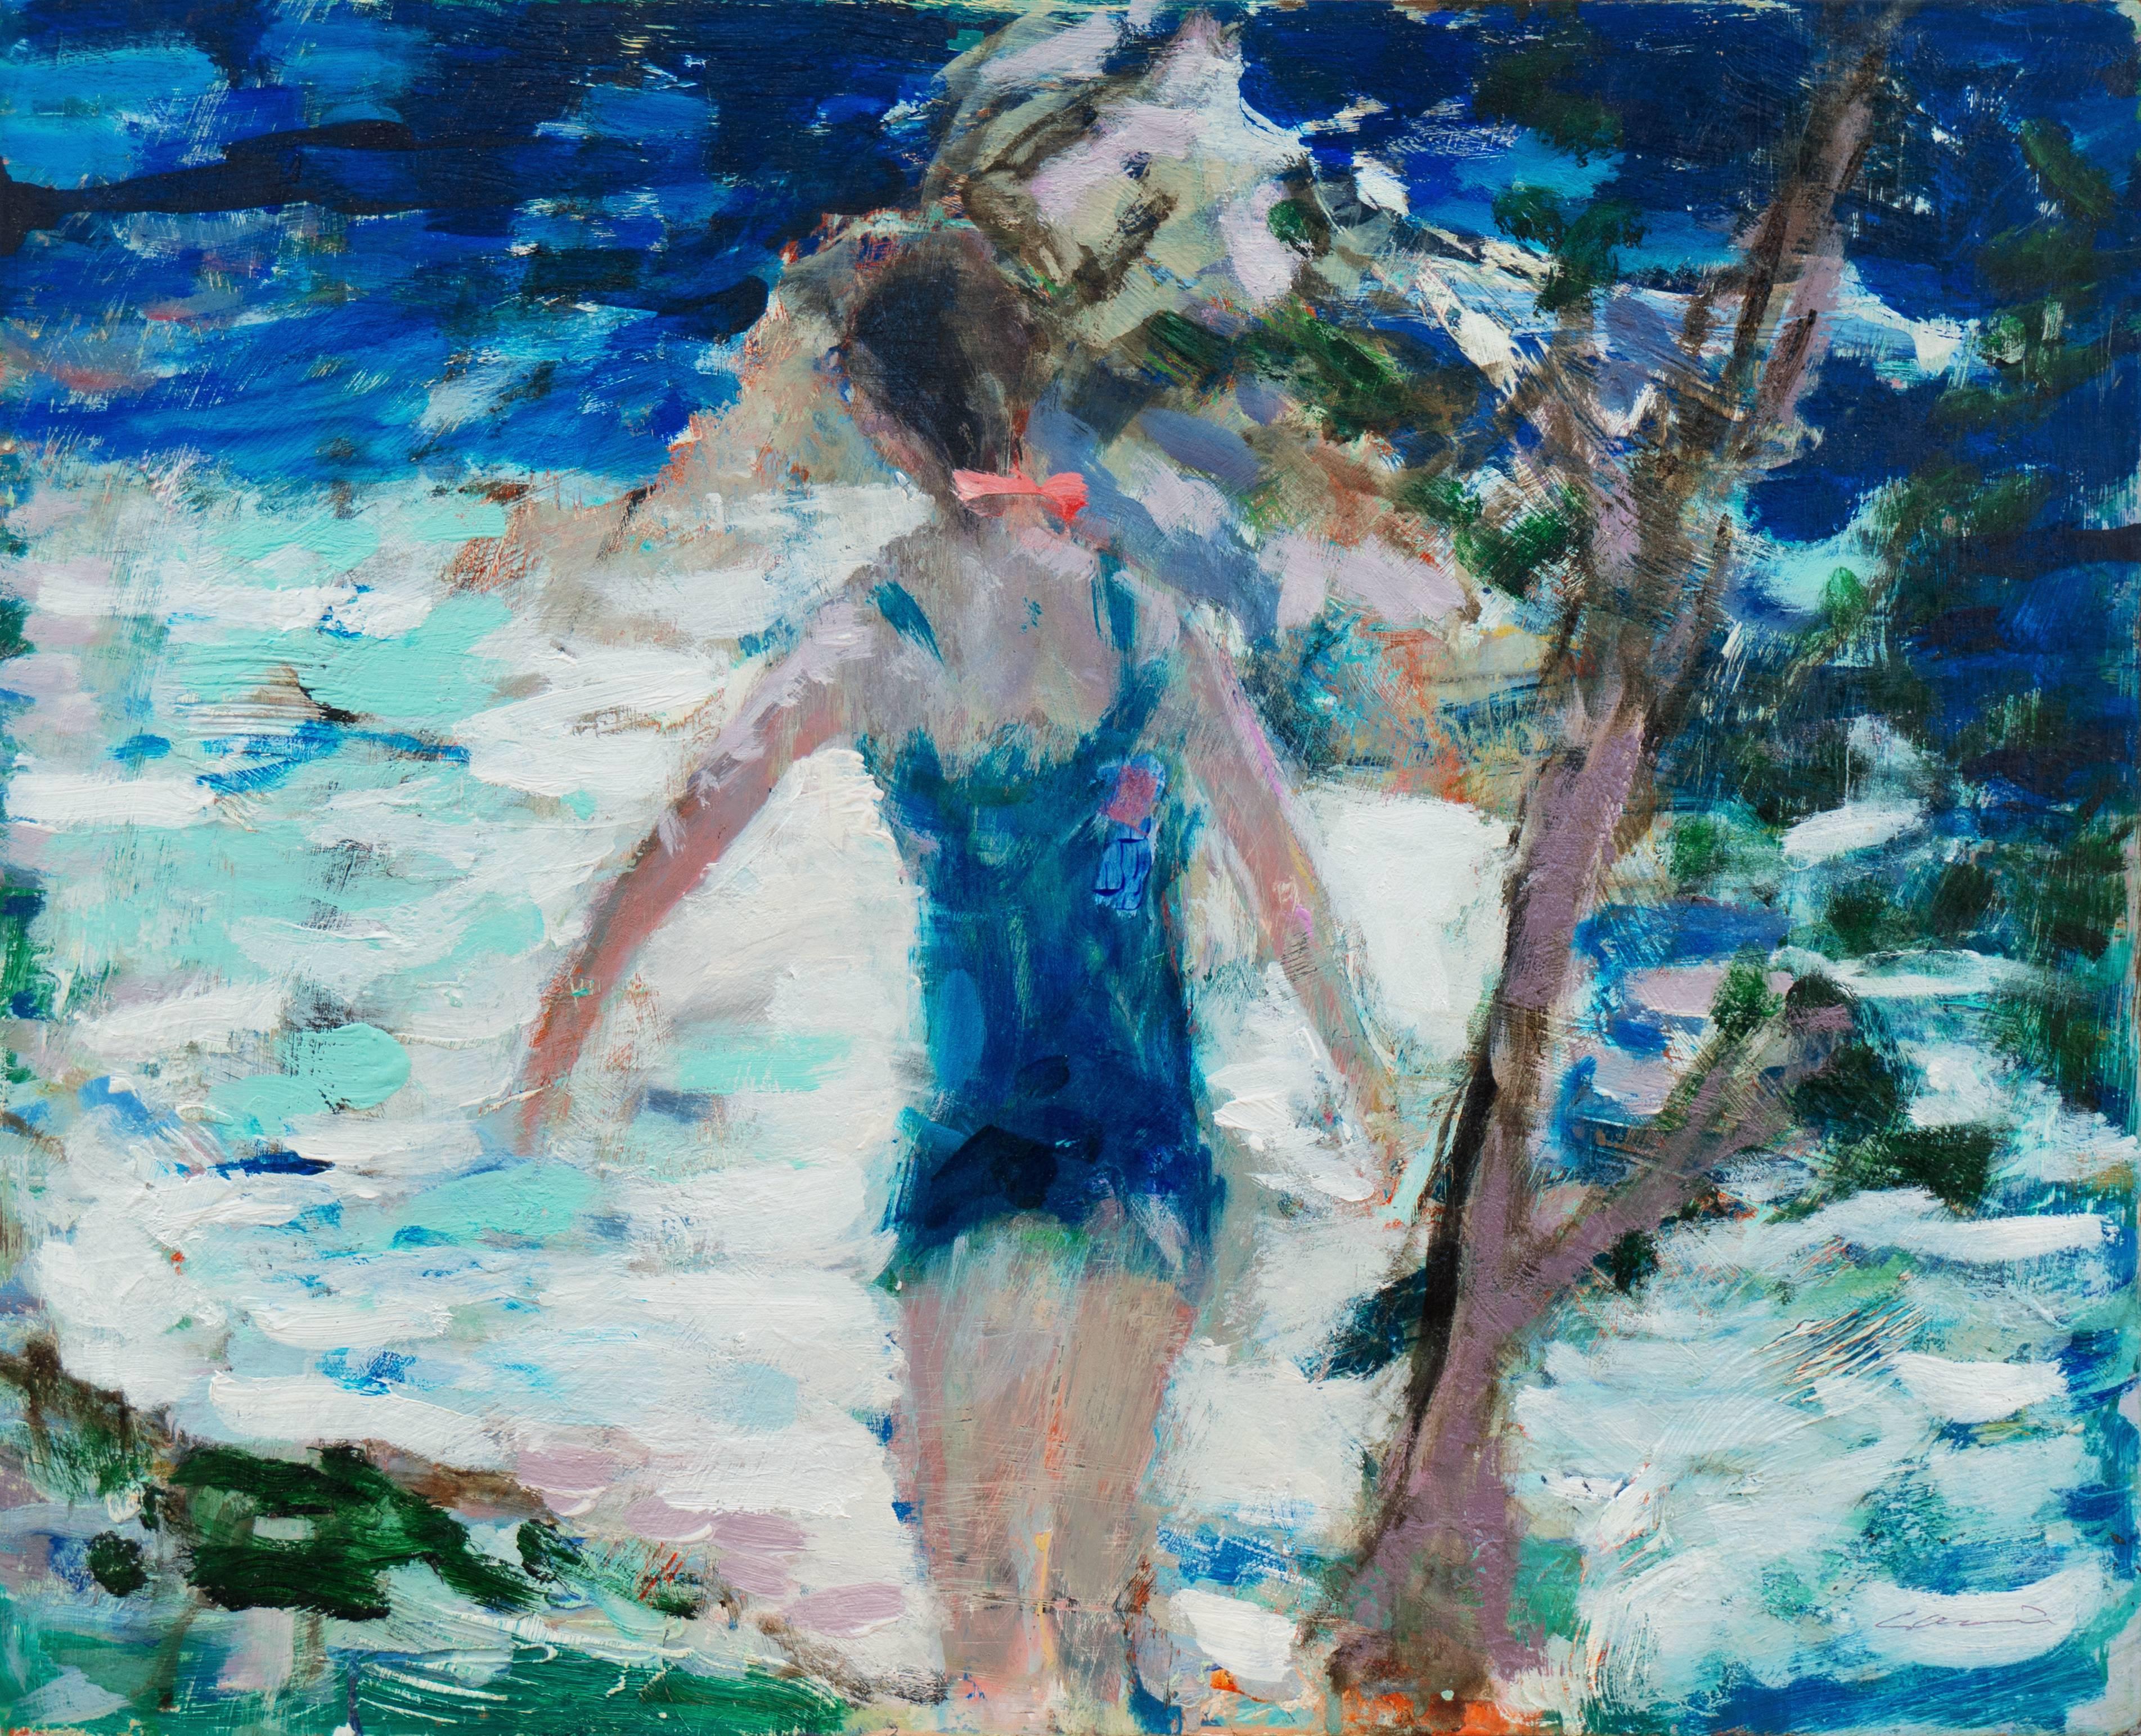 Robert Canete Landscape Painting - 'Young Woman Bathing, Carmel', California Post-Impressionist, Stanford, Big Sur